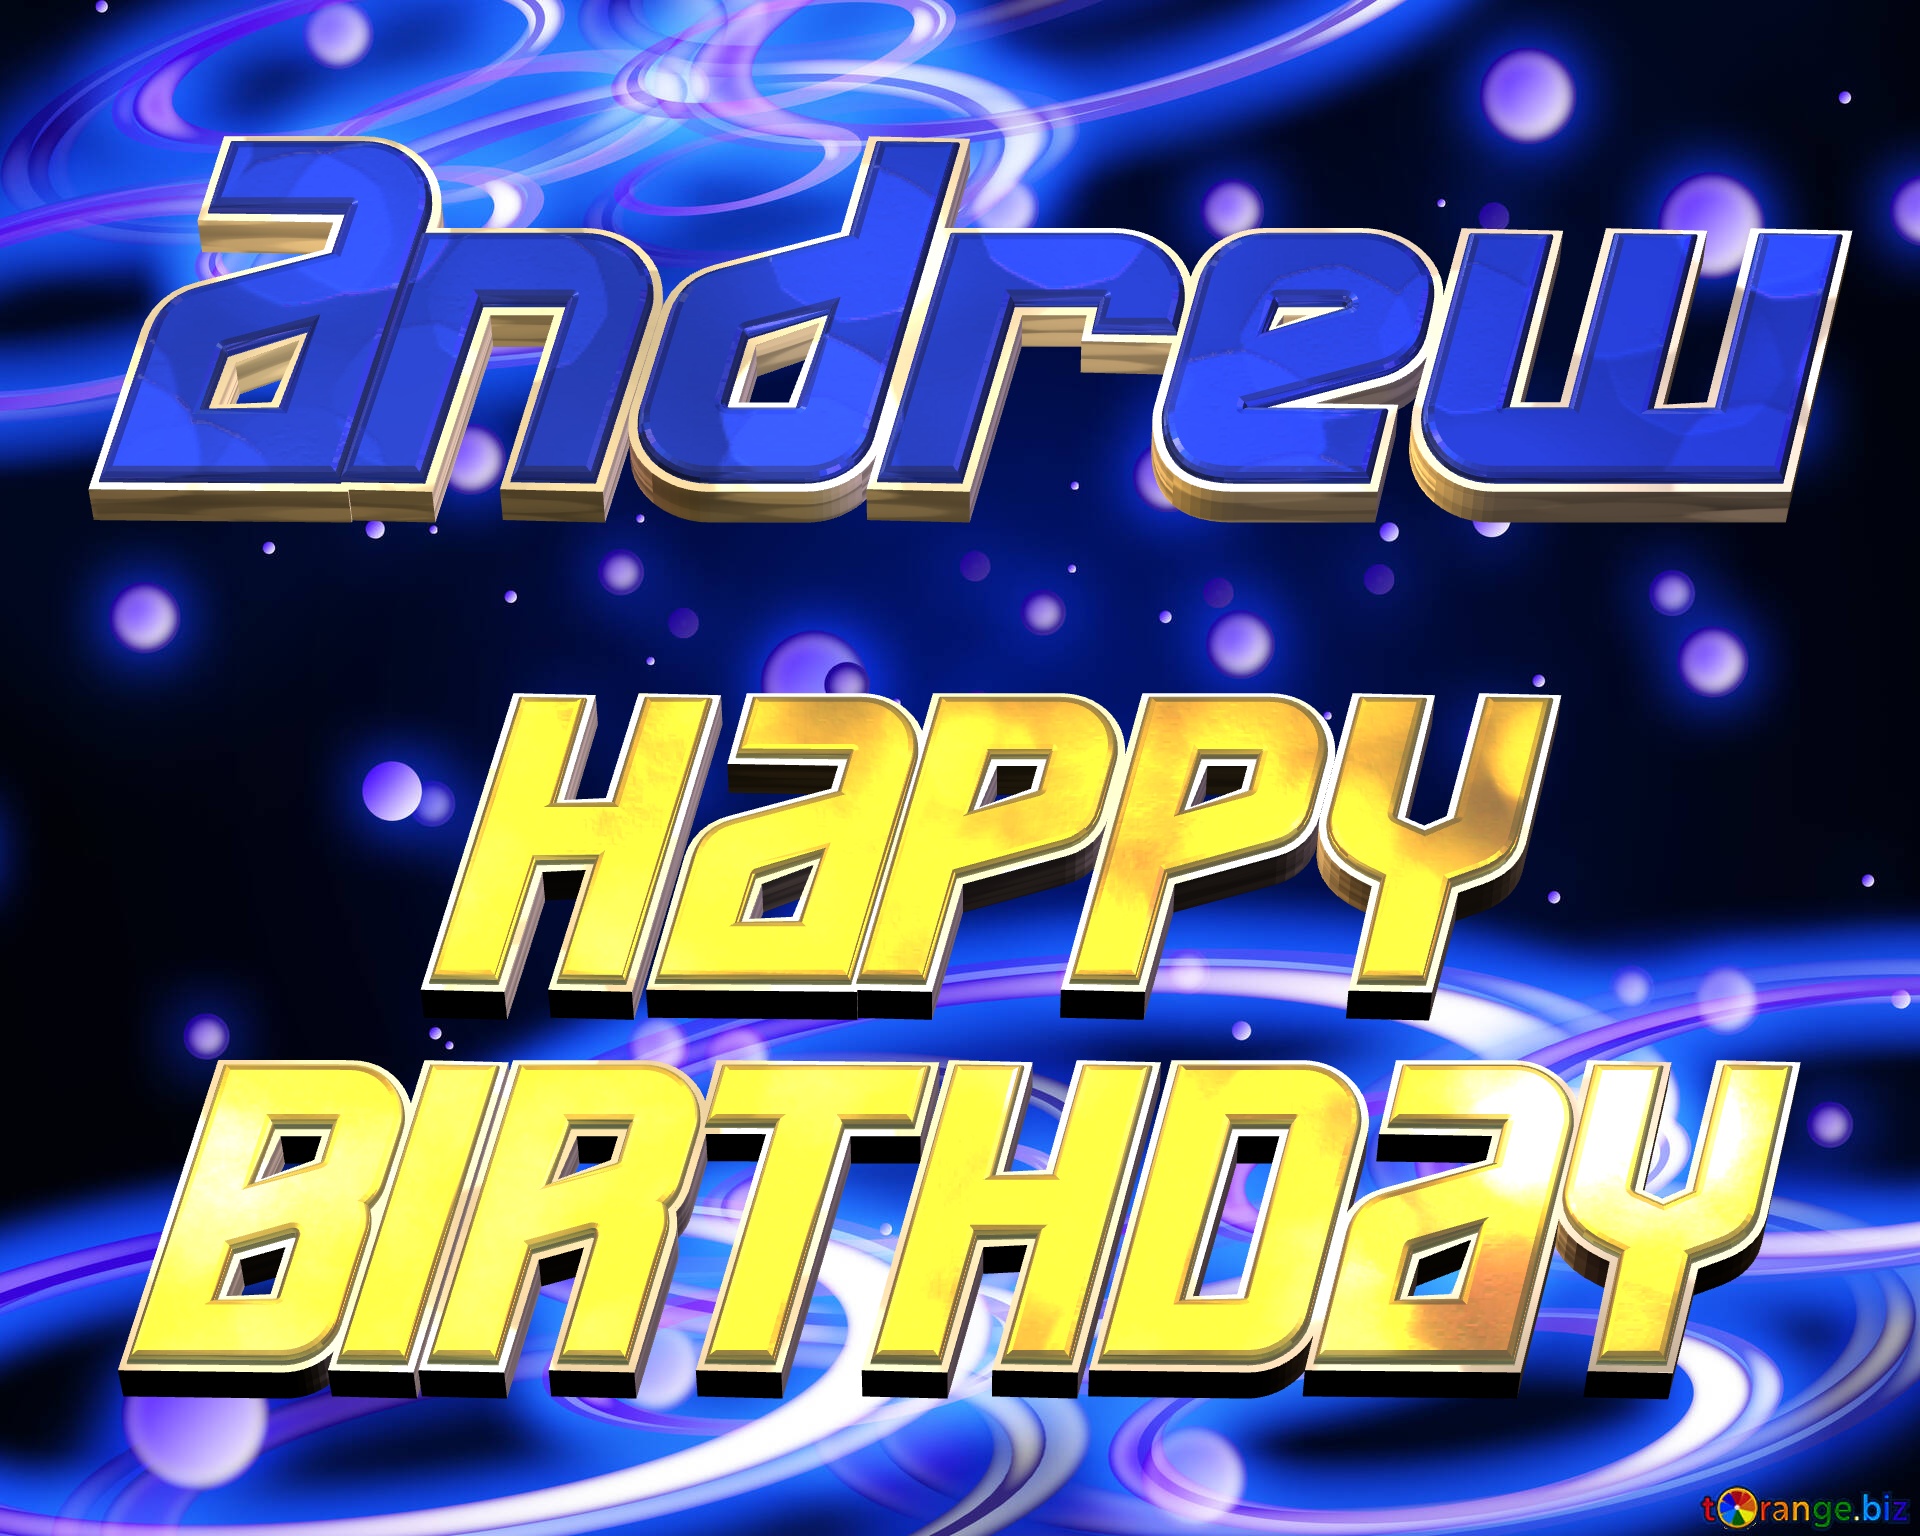 Andrew Space Happy Birthday! Technology background №54919